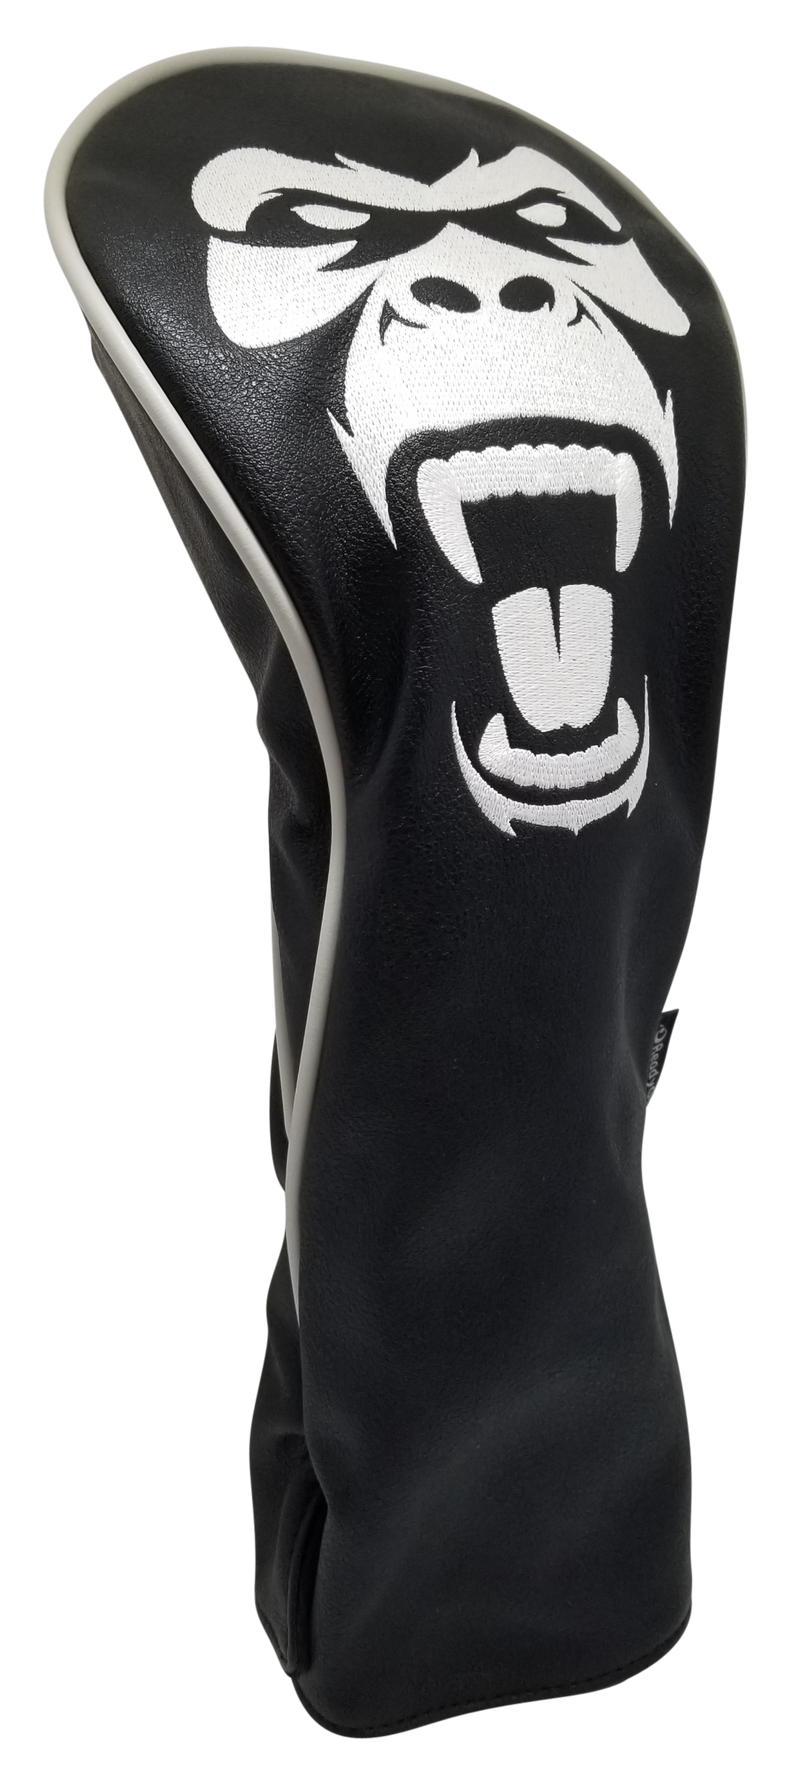 Great Ape Embroidered Driver Headcover by ReadyGOLF